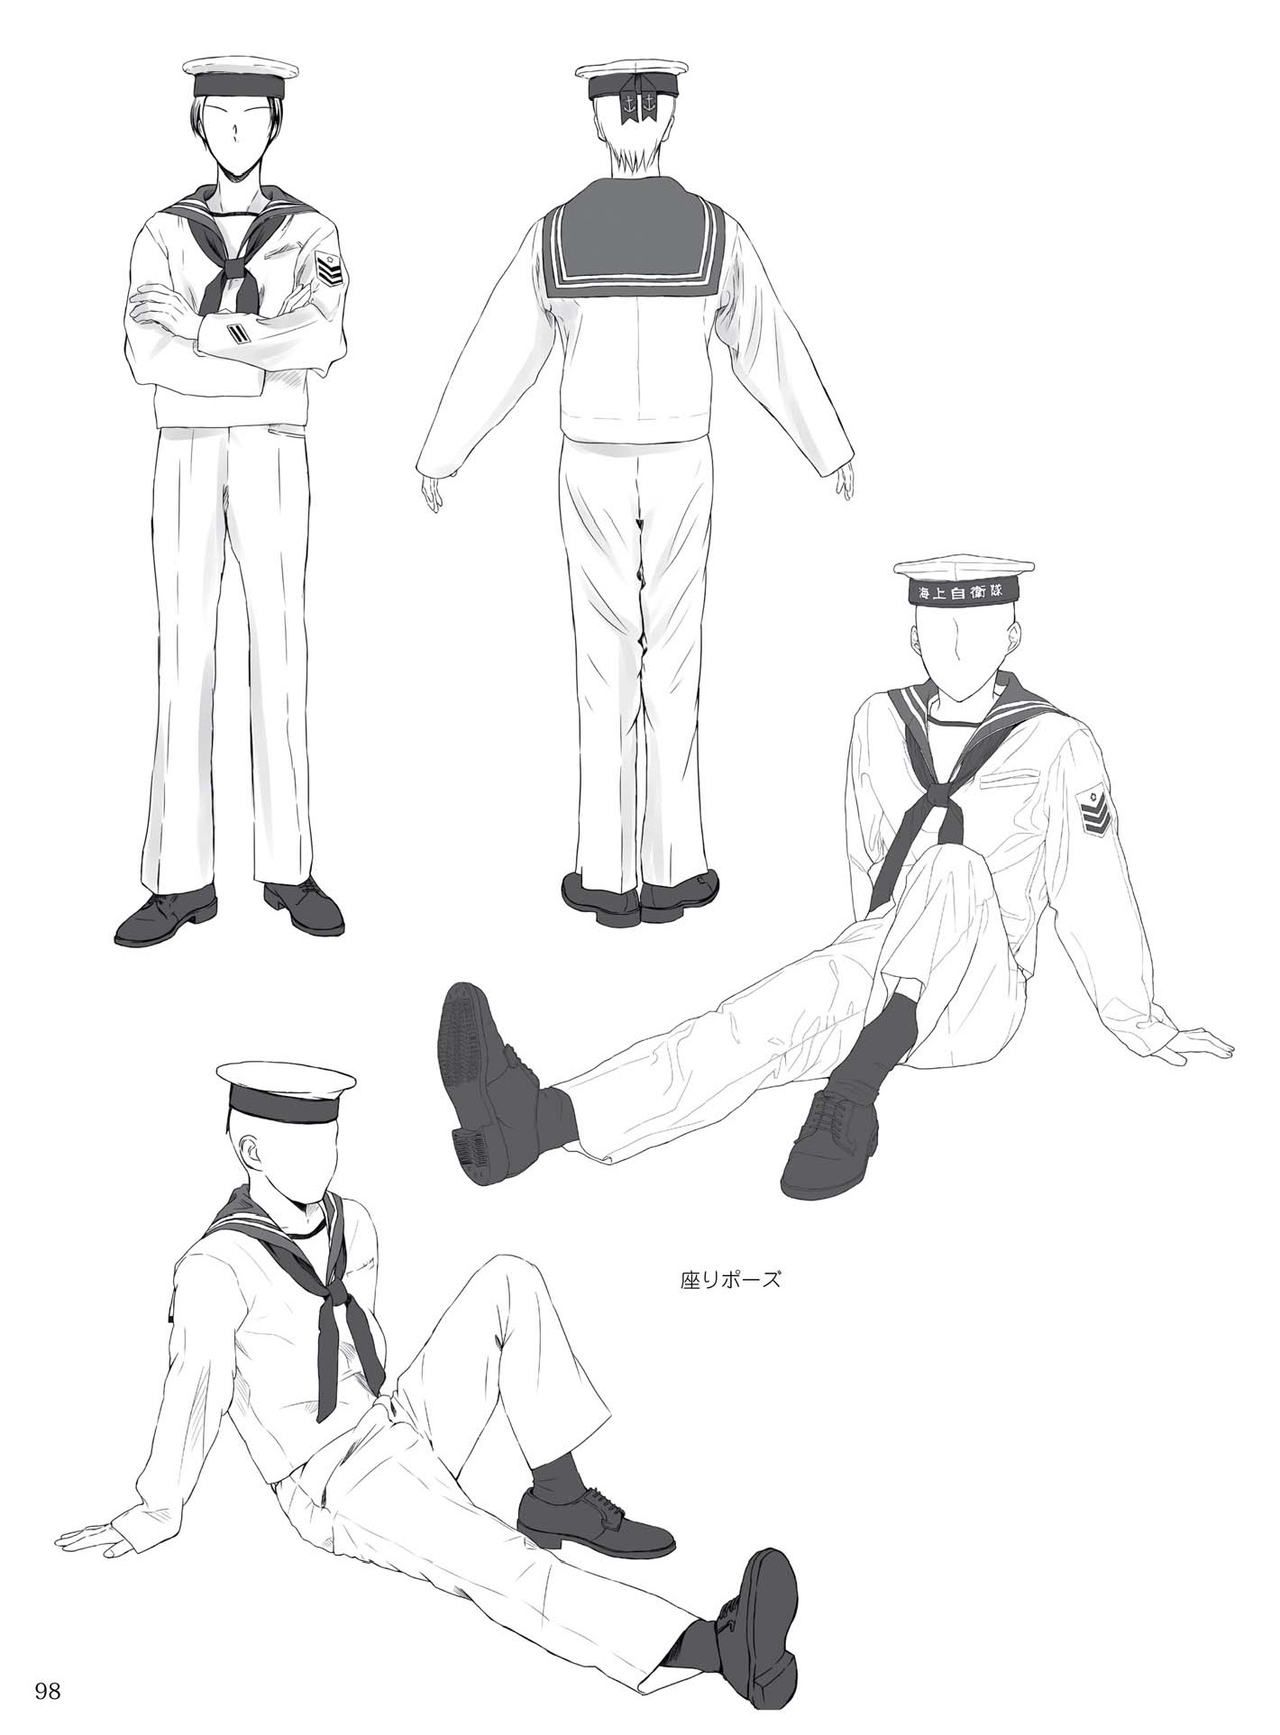 How to draw military uniforms and uniforms From Self-Defense Forces 軍服・制服の描き方 アメリカ軍・自衛隊の制服から戦闘服まで 101